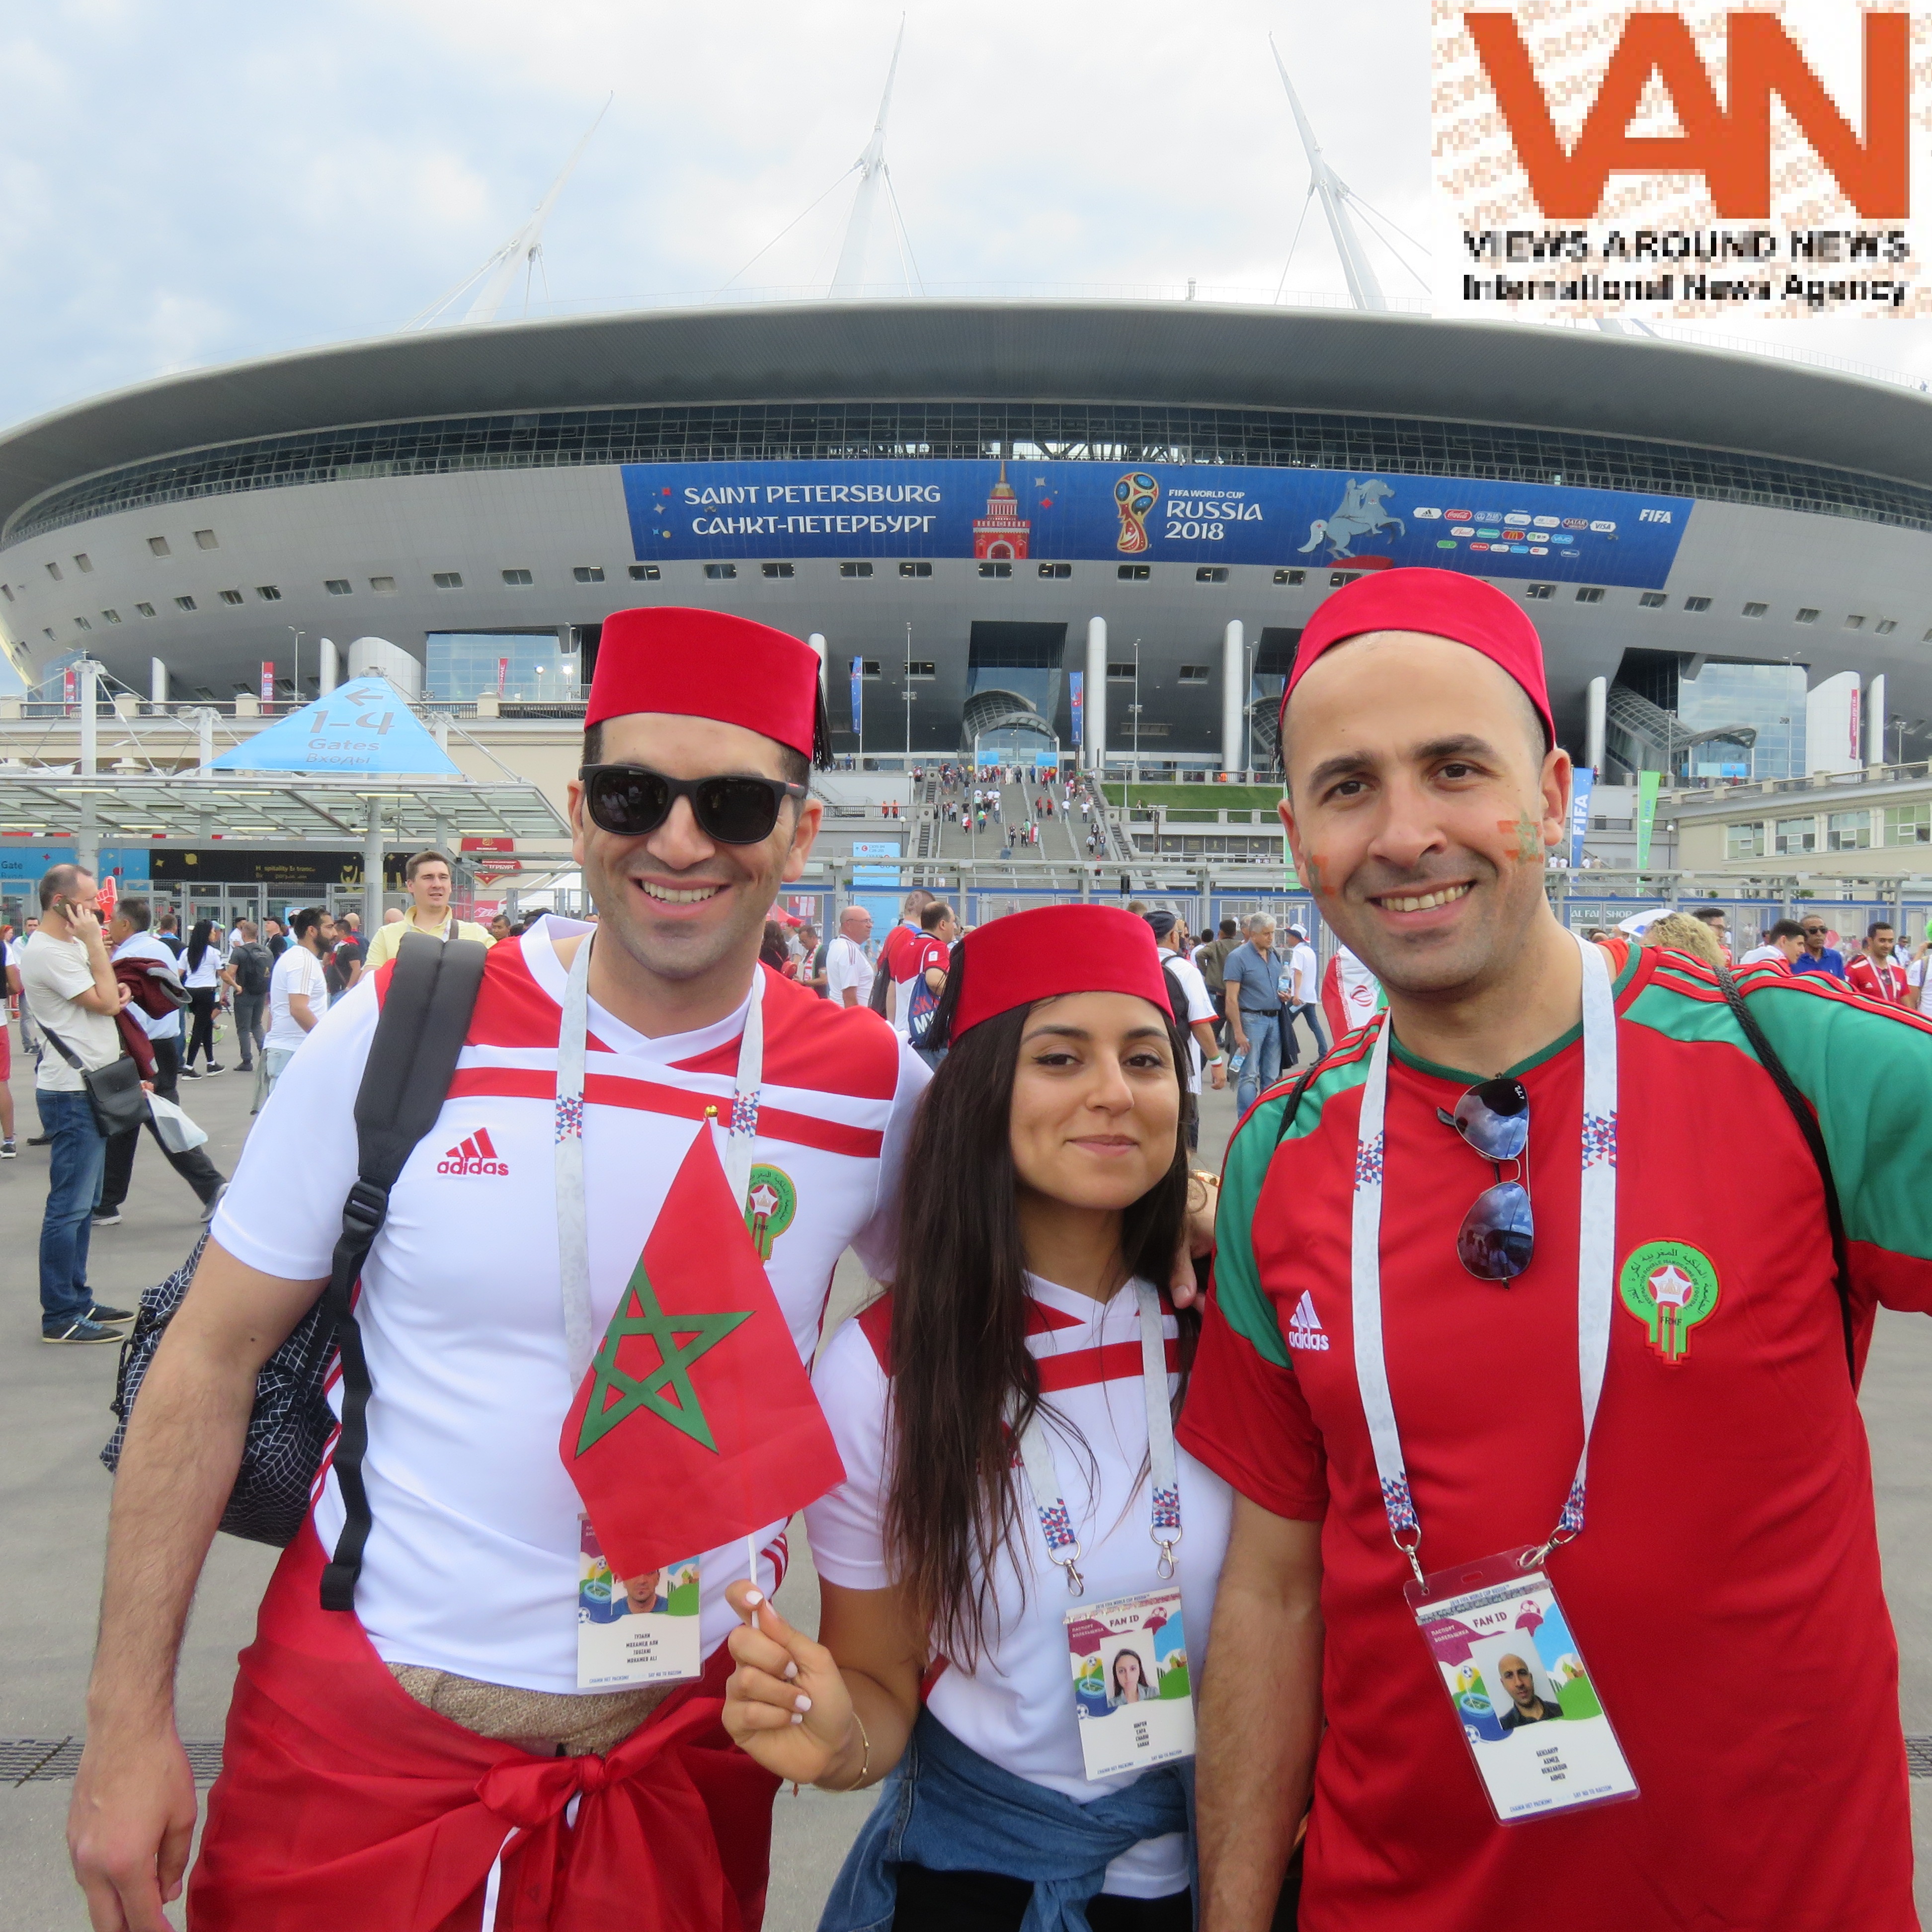 FIFA World Cup Fever with different types of FANs